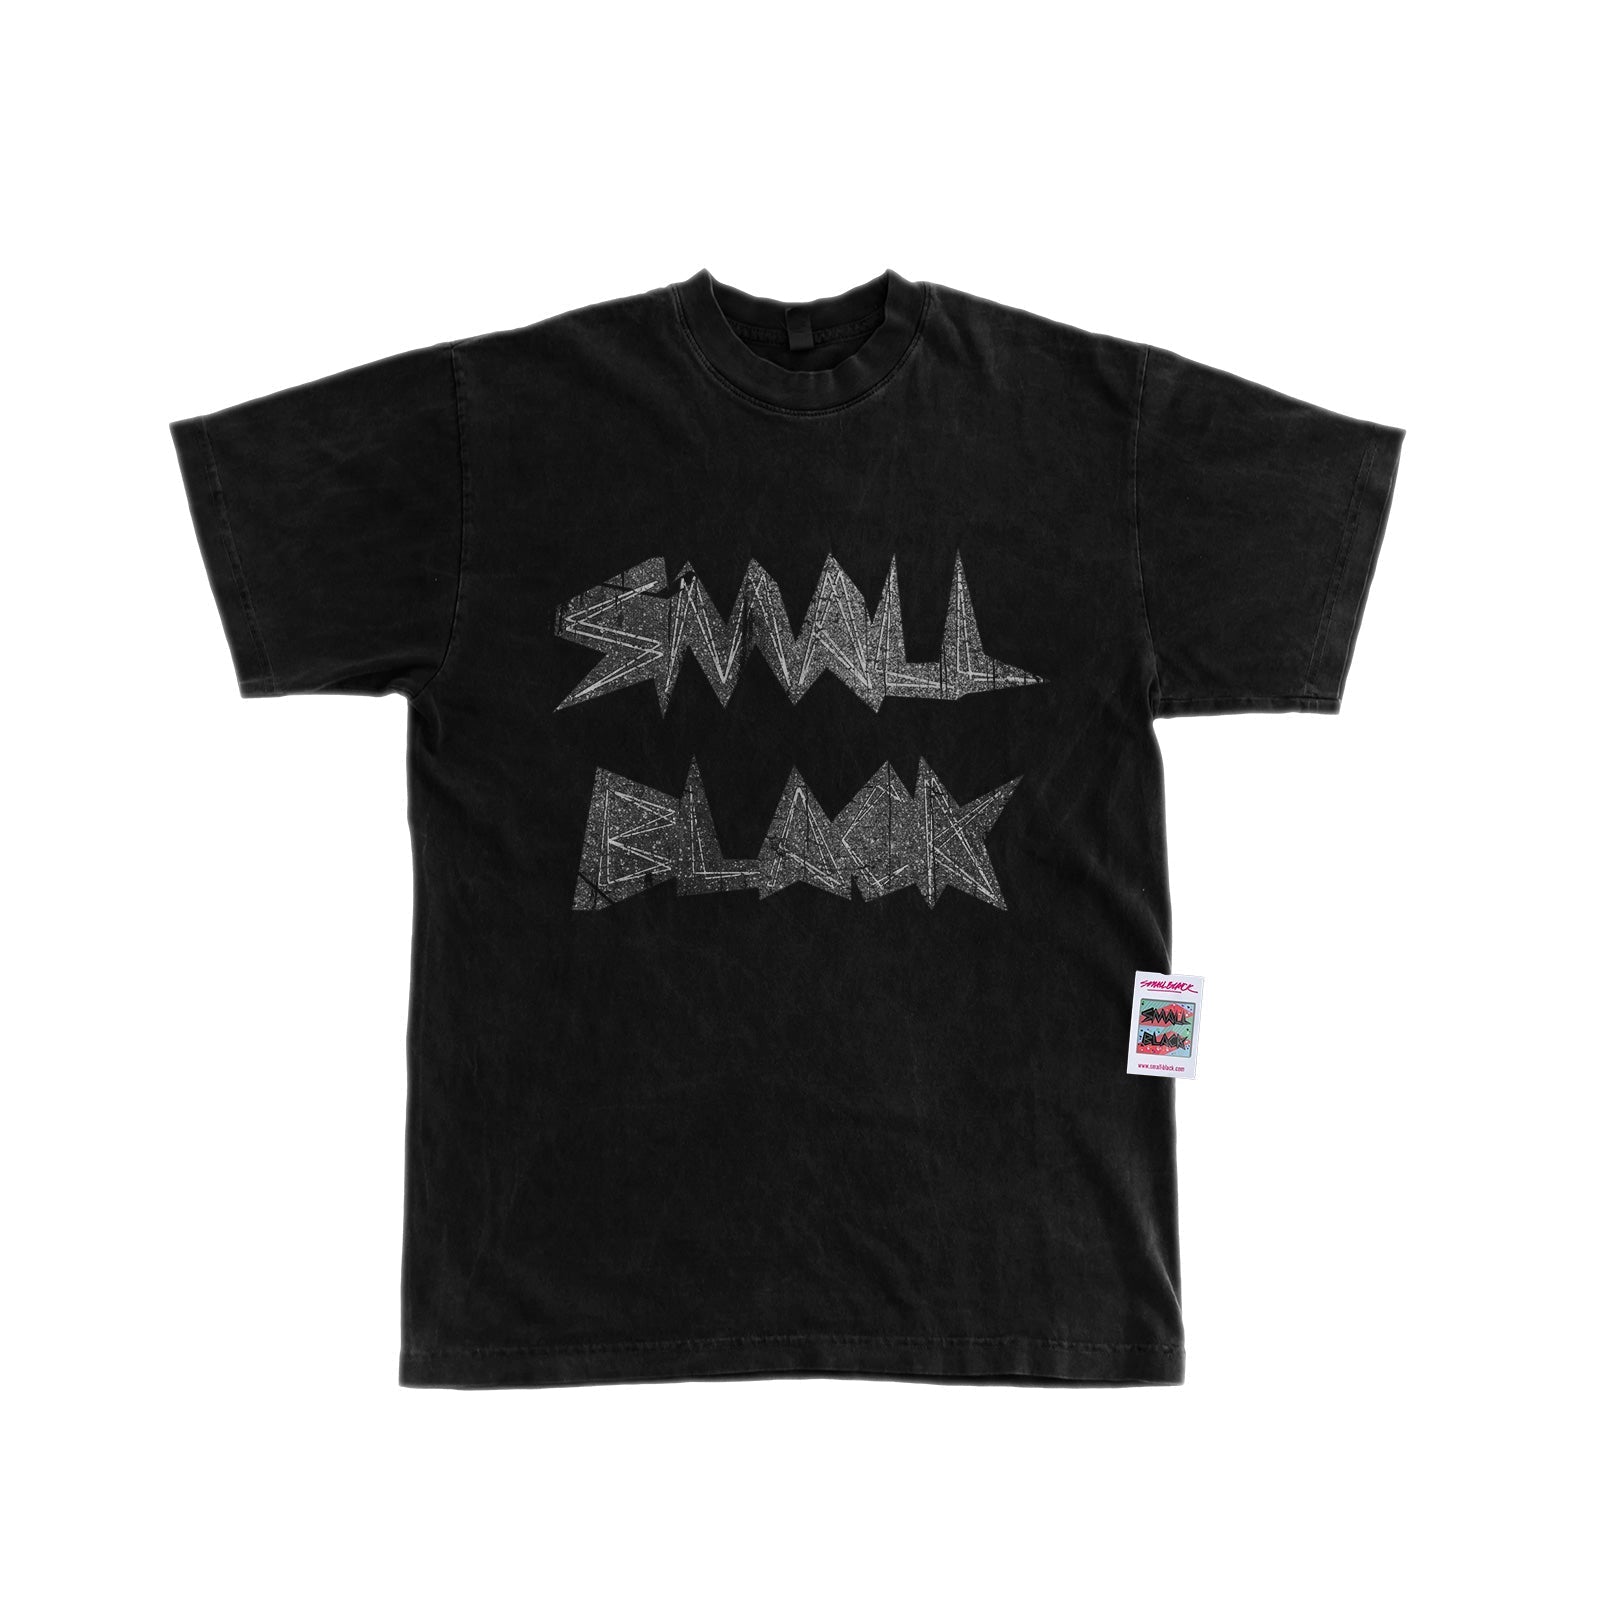 Small Black - Small Black Deluxe 2xLP Bundle w/ T-Shirt & Pin - 100% Electronica Official Store (Photo 2)